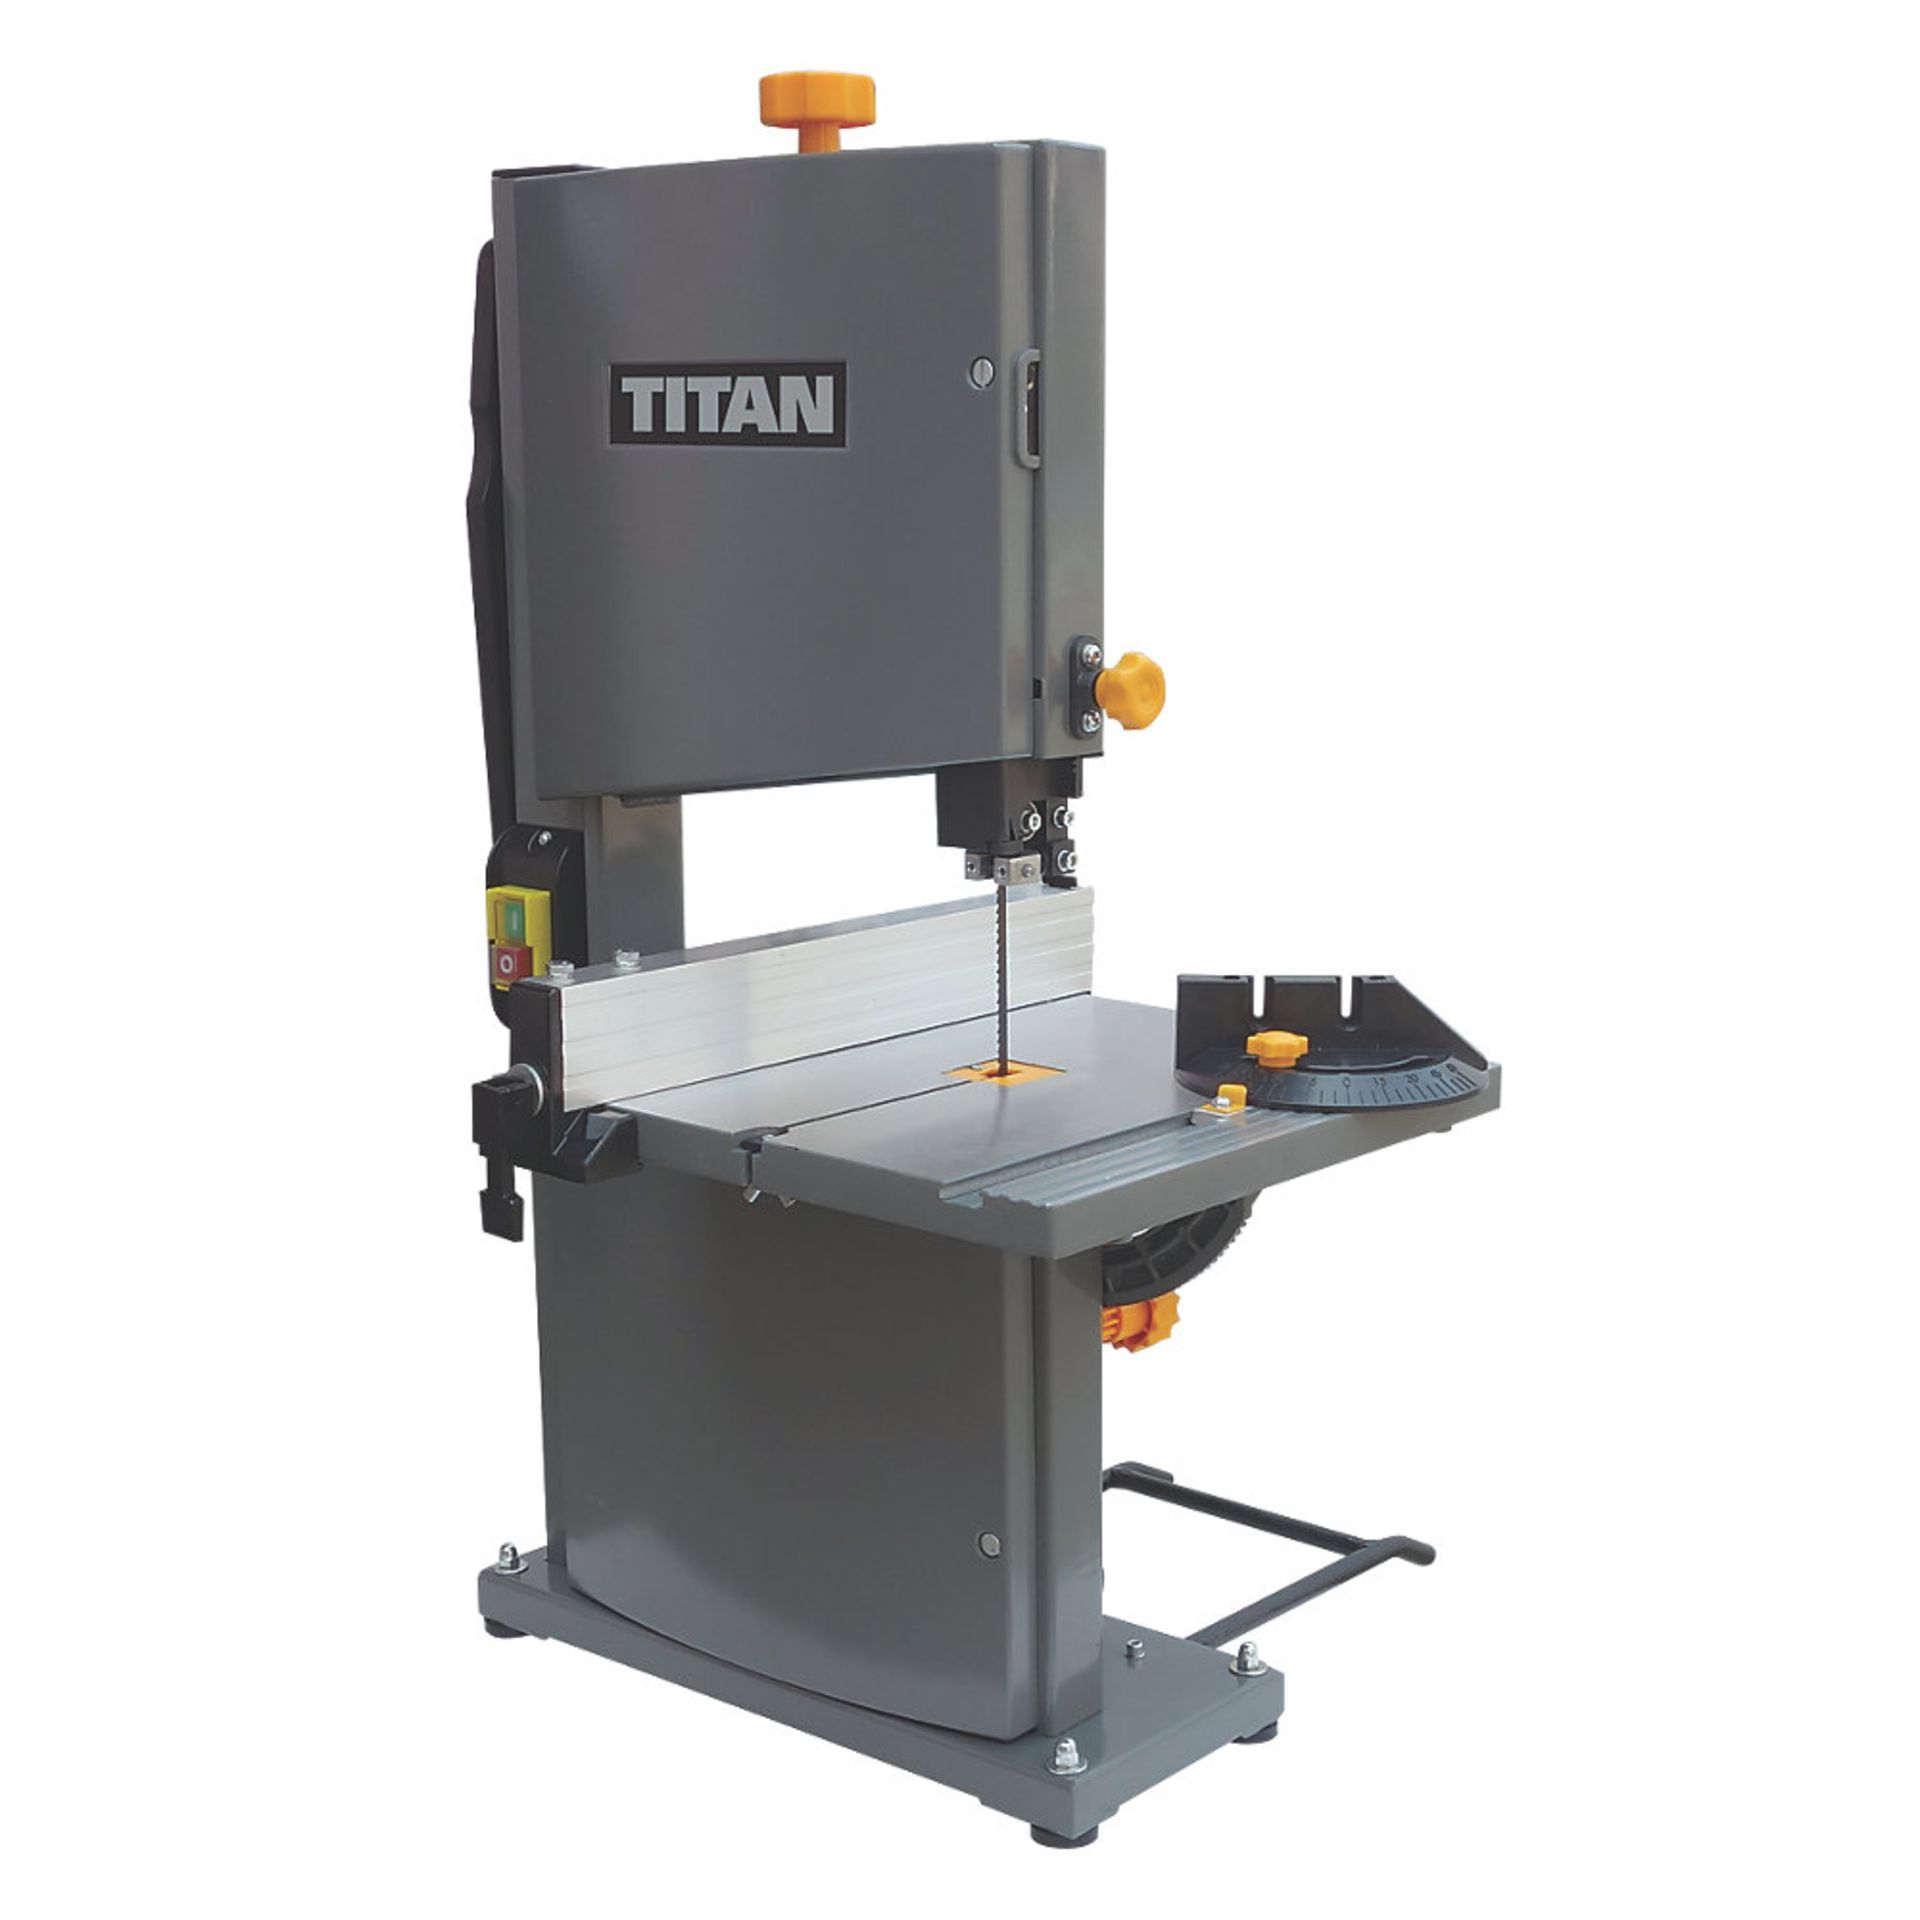 (REF2147097) 1 Pallet of Customer Returns - Retail value at new £965.72. To include: Titan 1400W 20L